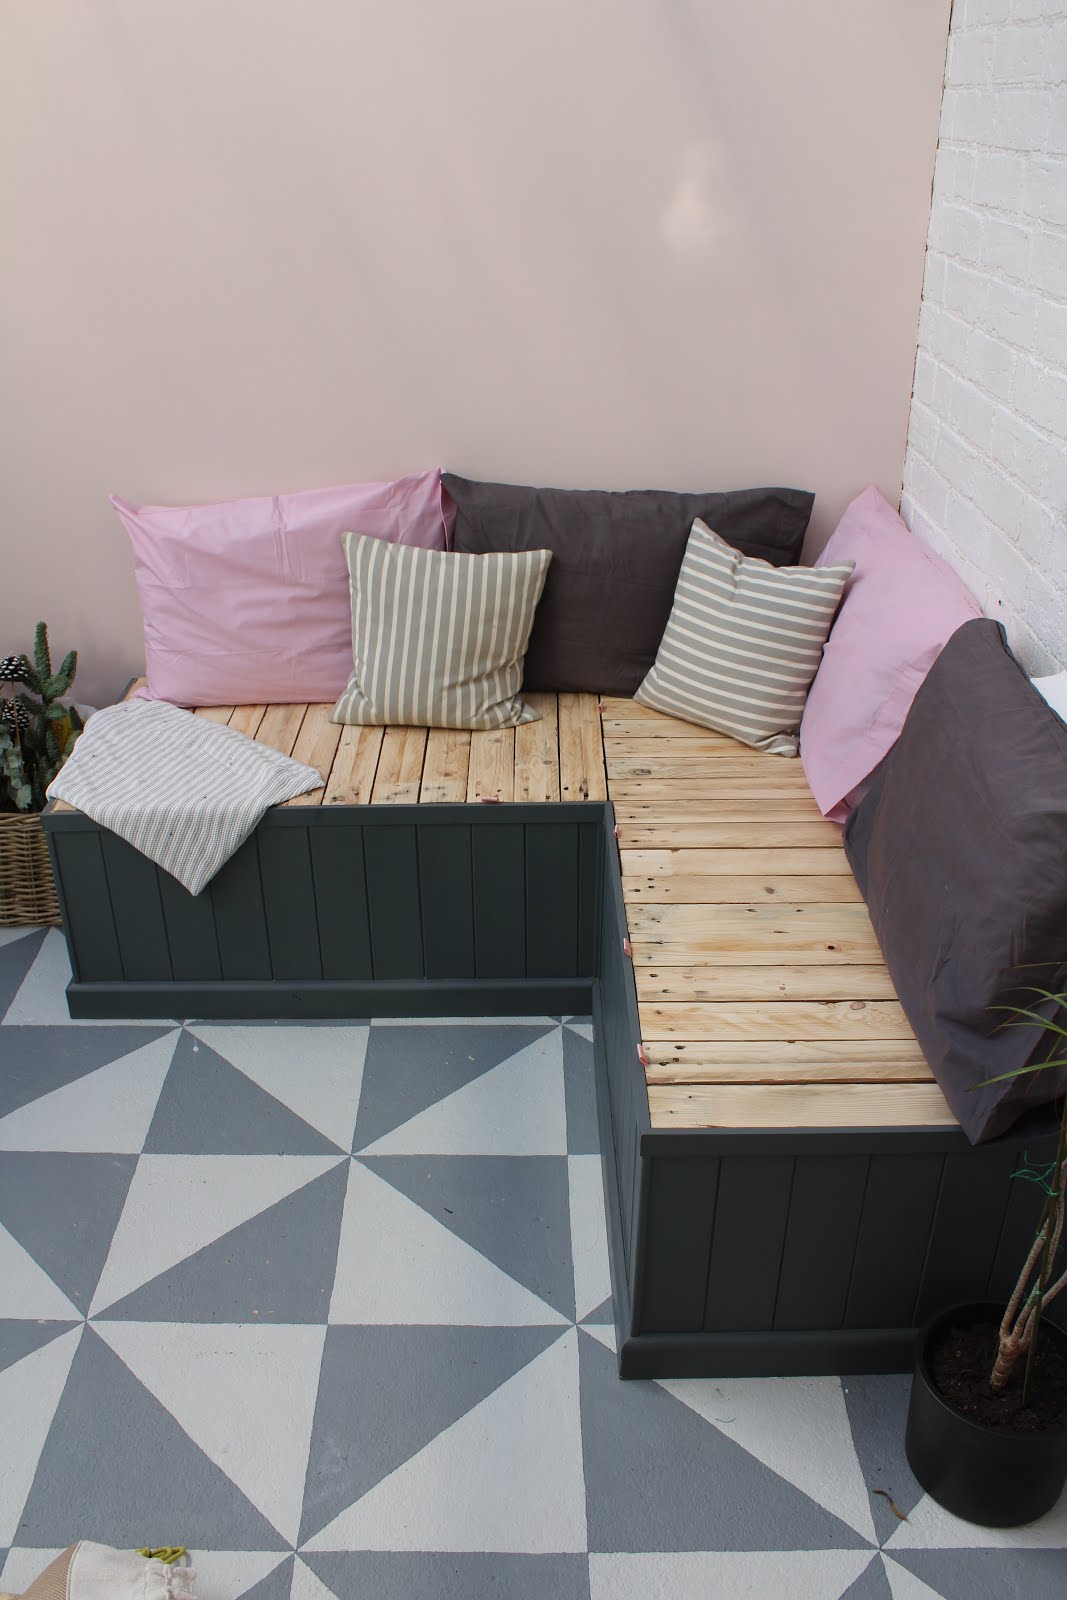 How to build pallet seating